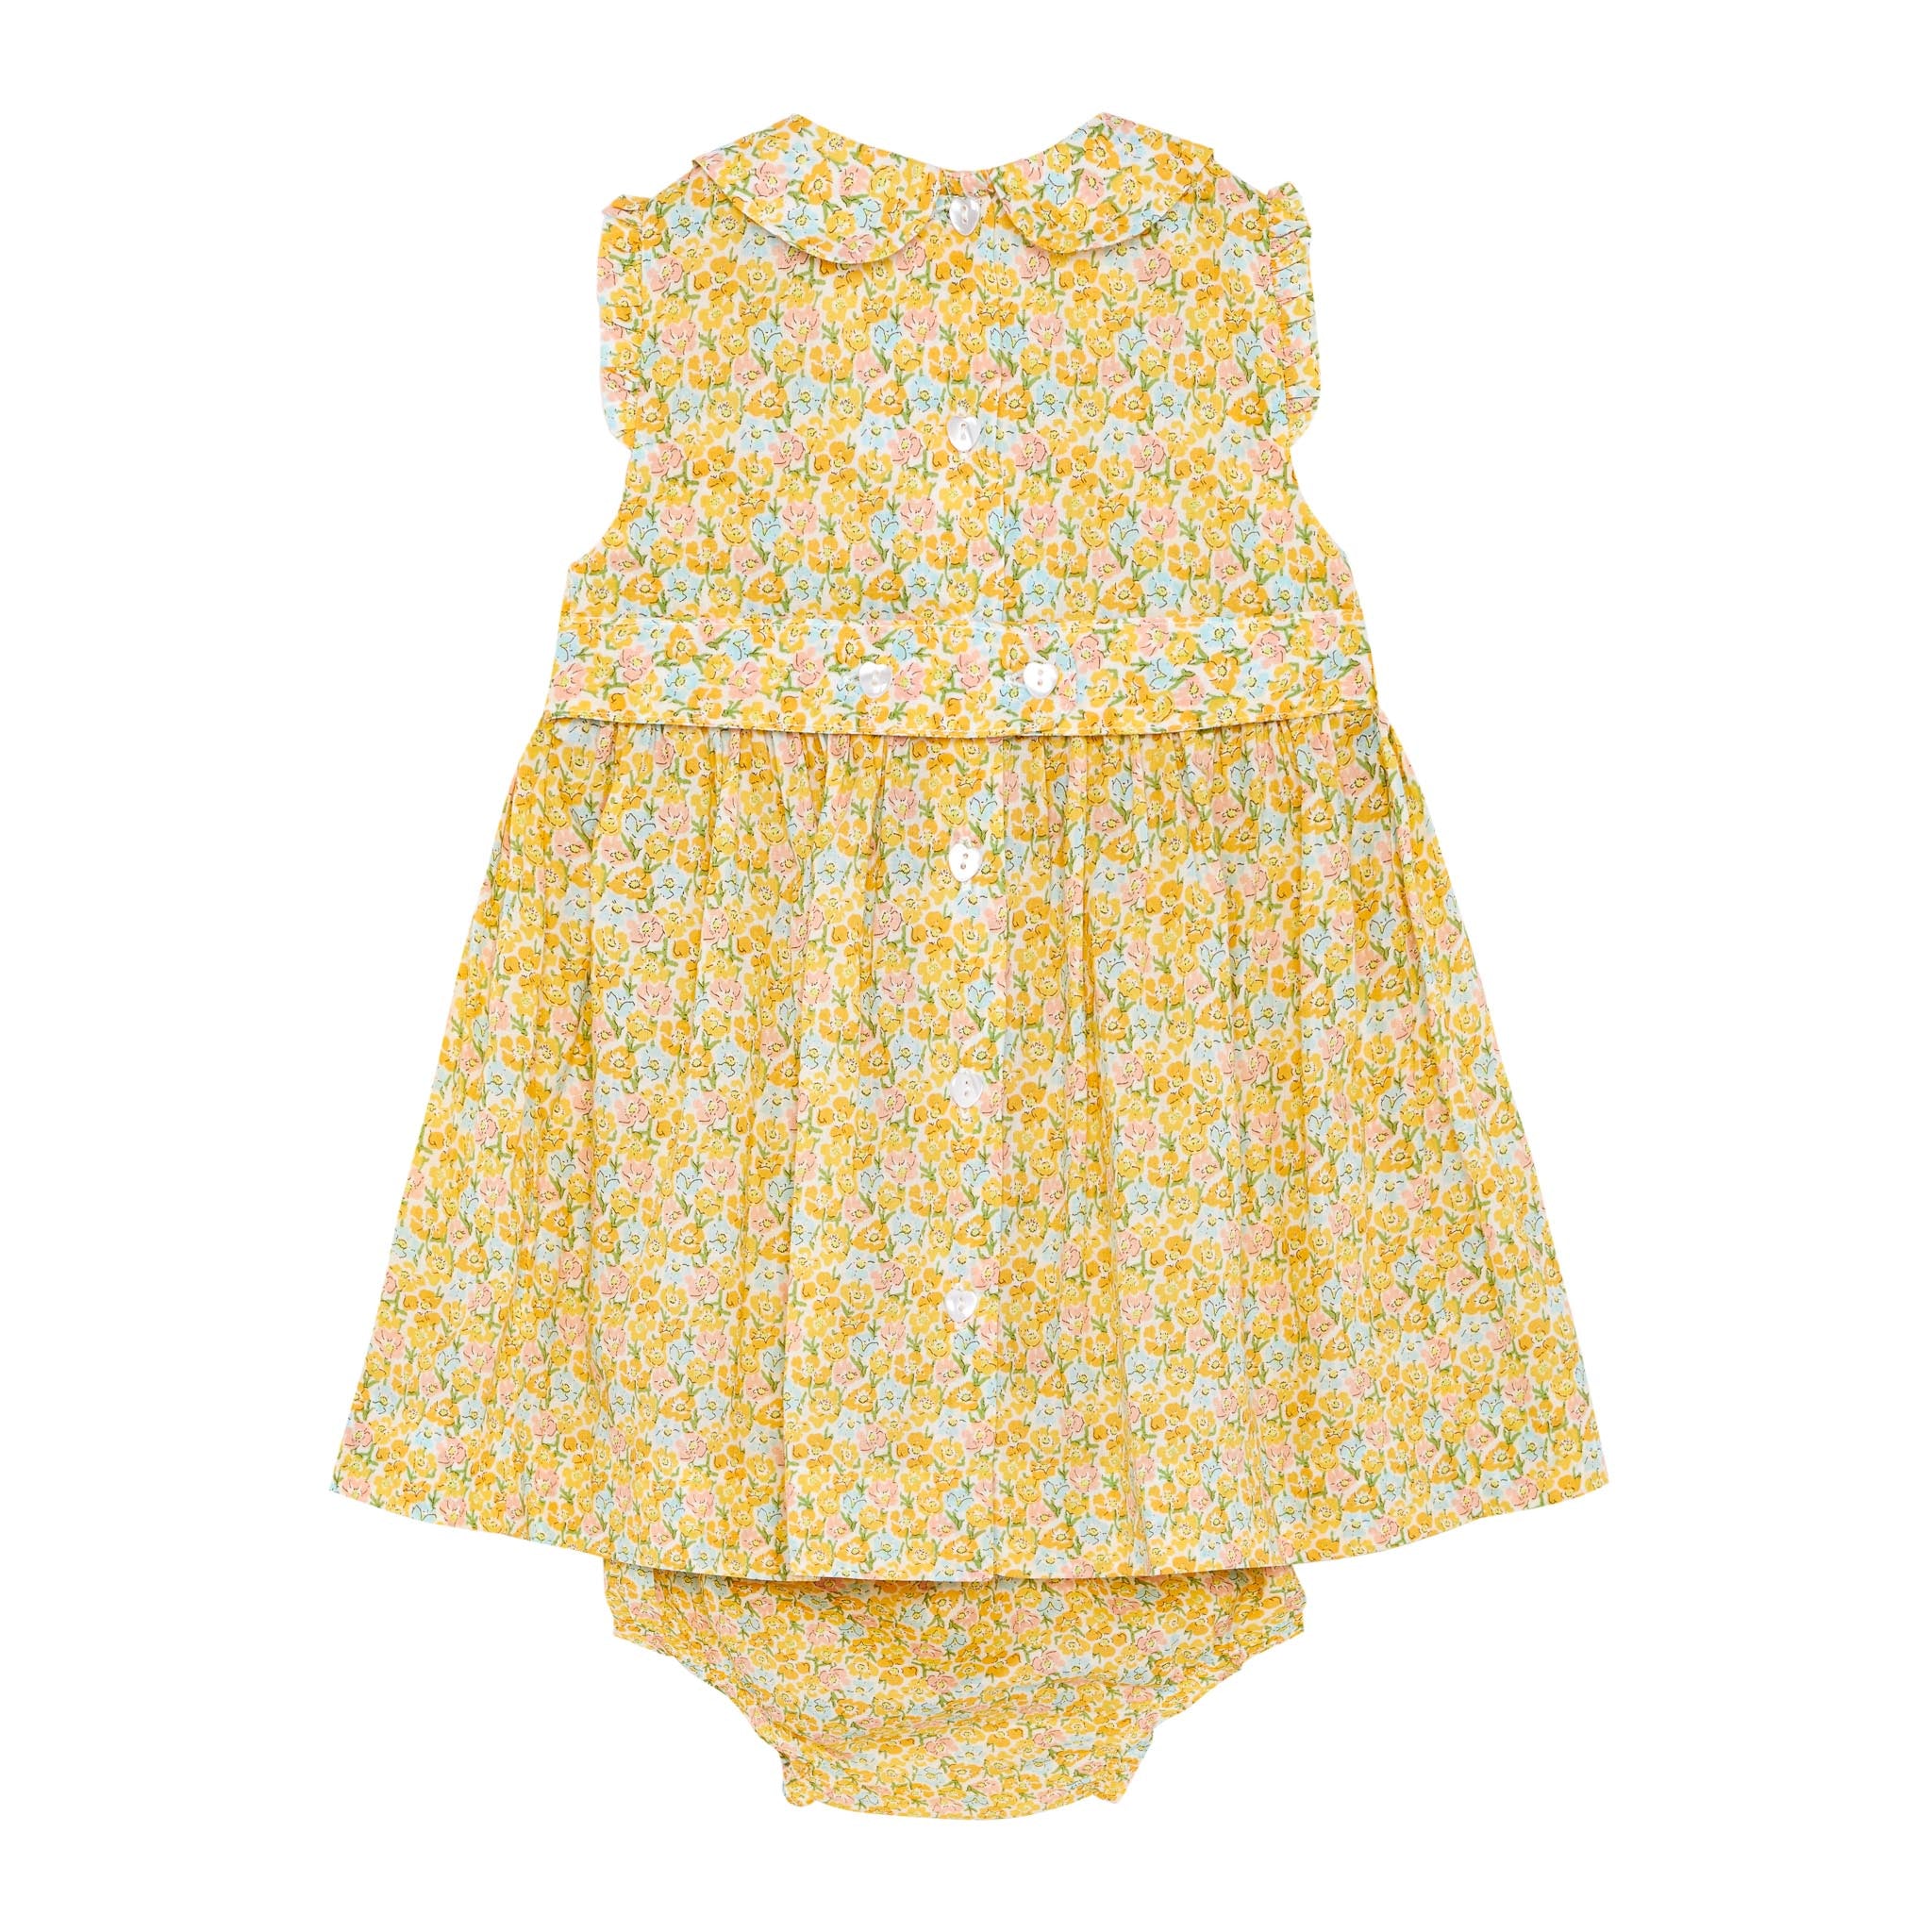 yellow baby dress with bloomer, smocked, back